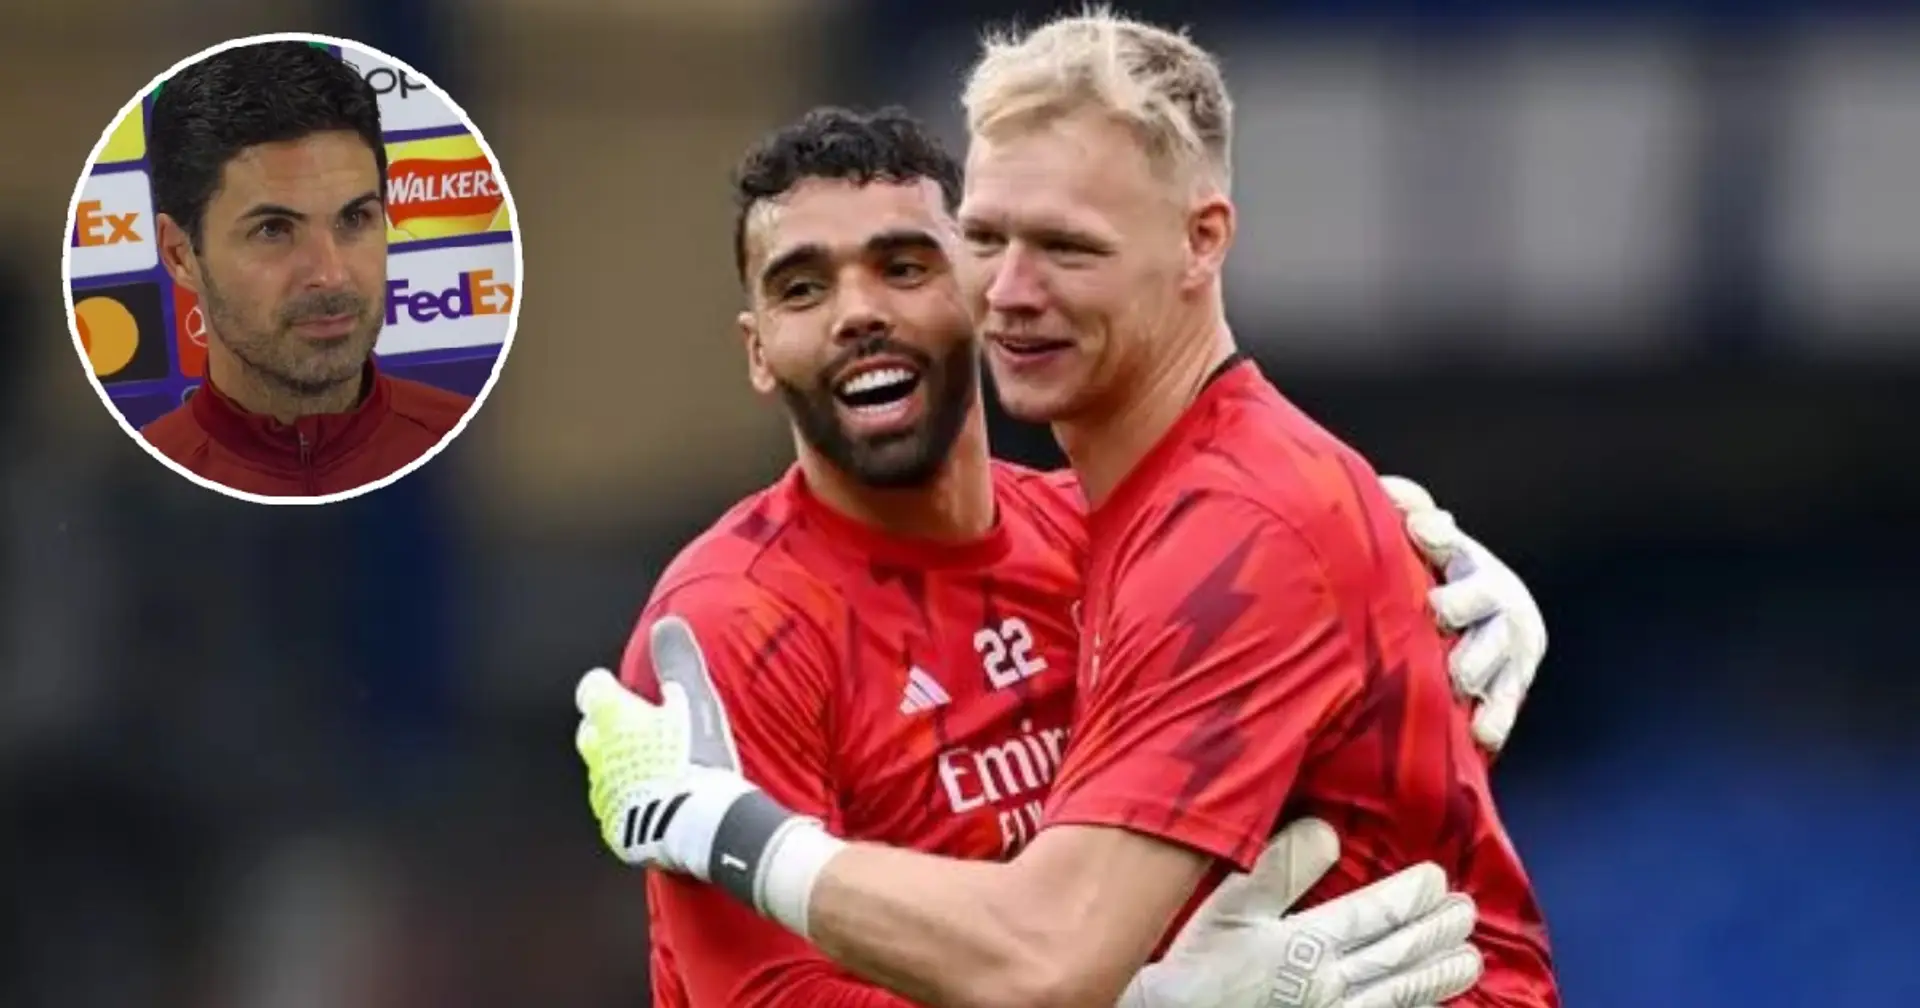 'We've been doing it for many years': Mikel Arteta responds to criticism of goalkeepers rotation 